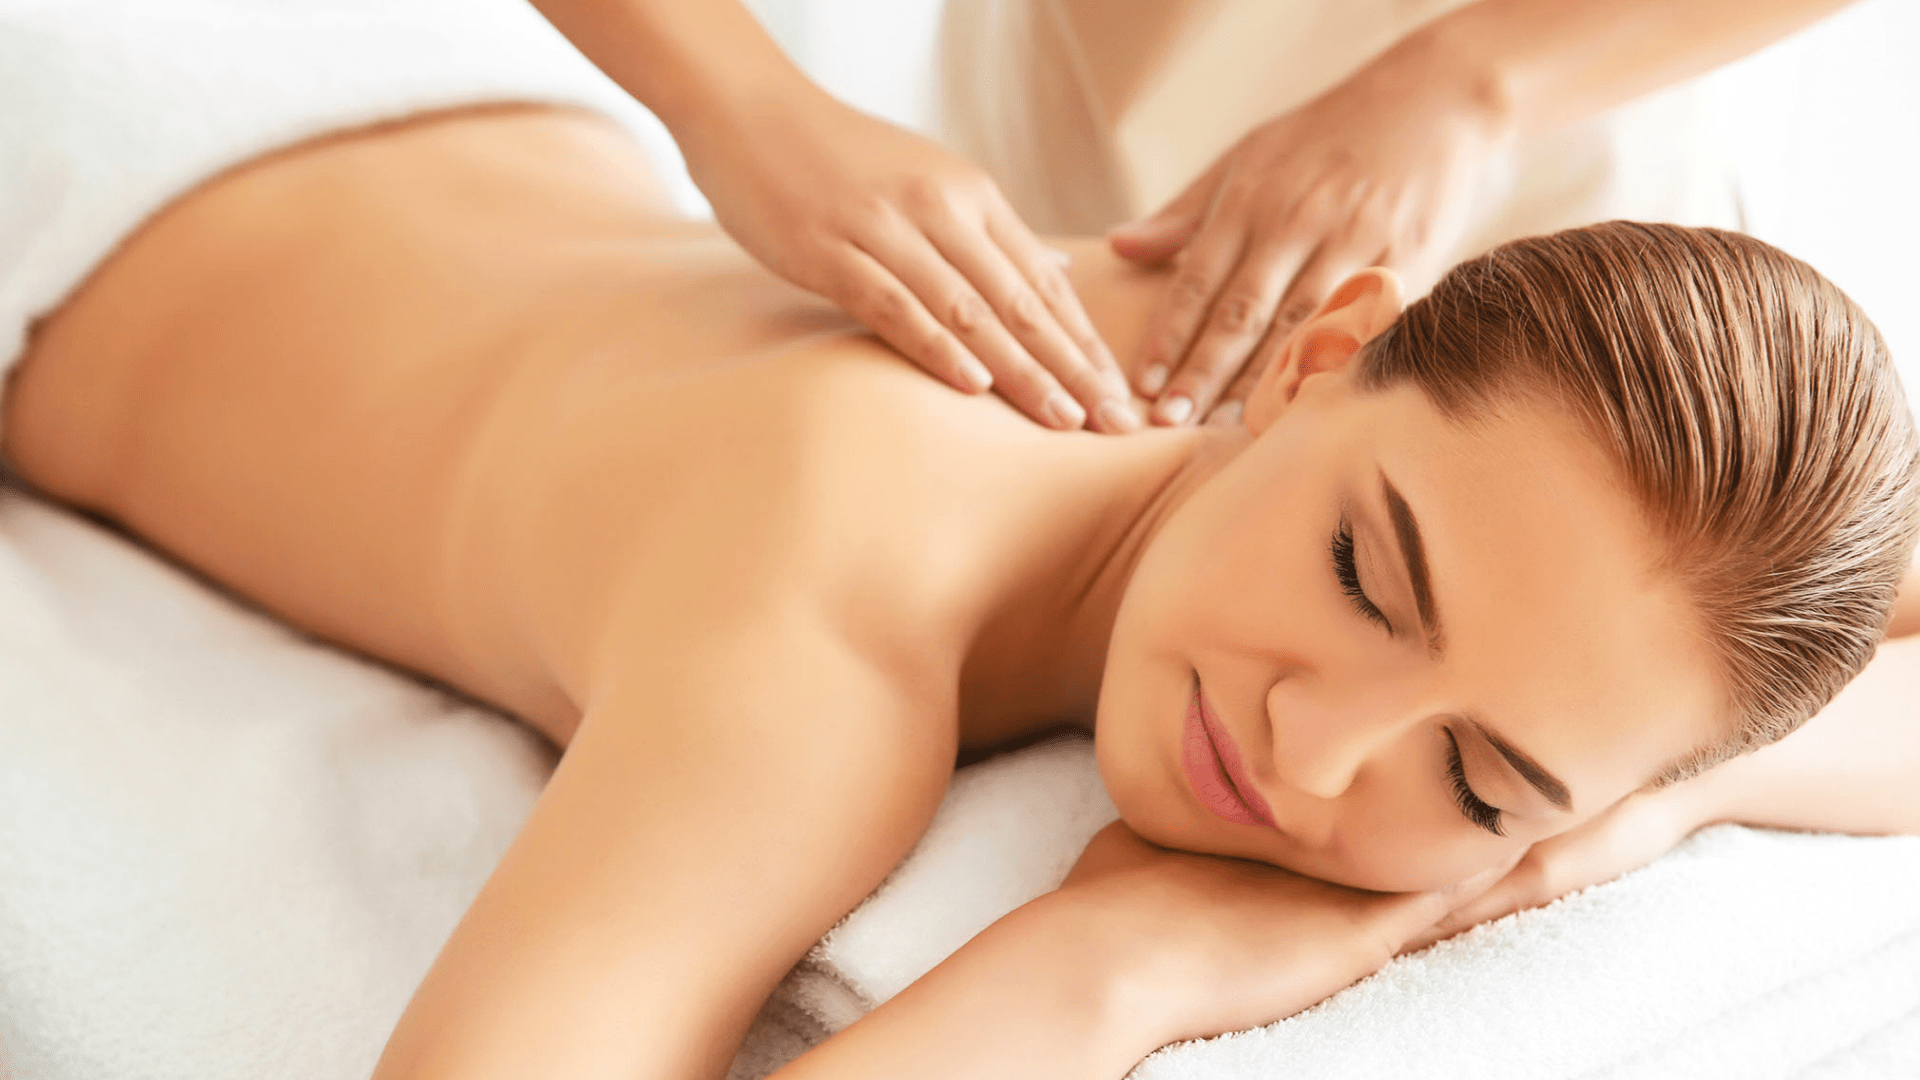 Who should try massage therapy